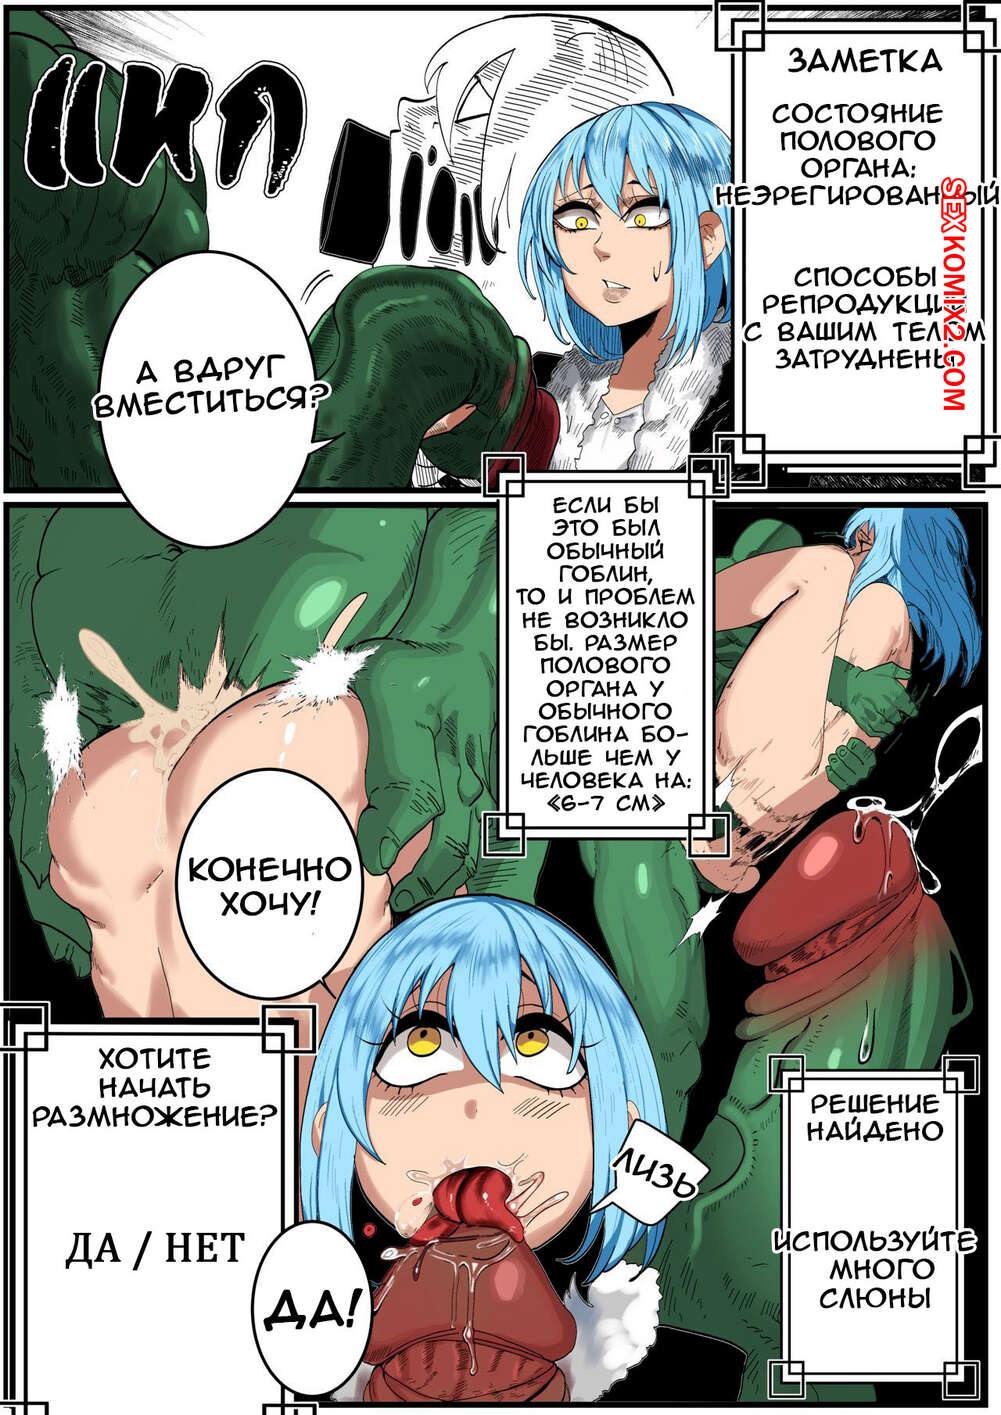 Fantasy and Desire: That Time I Got Reincarnated as a Slime Hentai